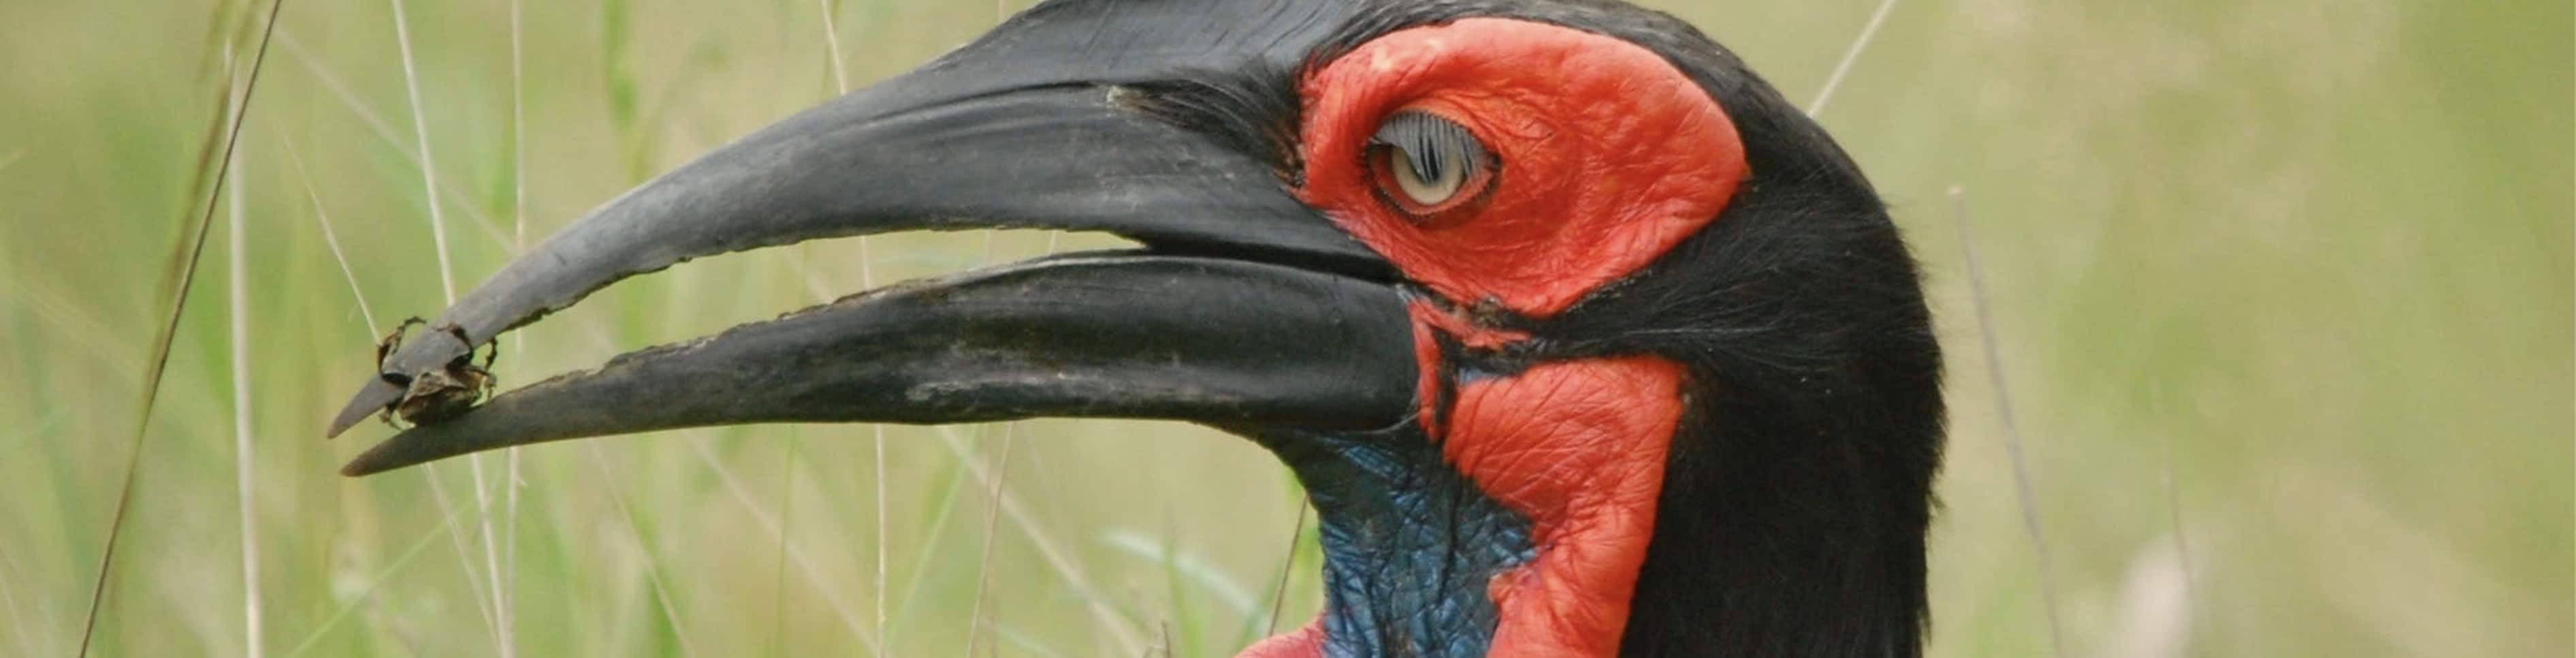 Ground Hornbill with Beetle in Mouth - Headshot